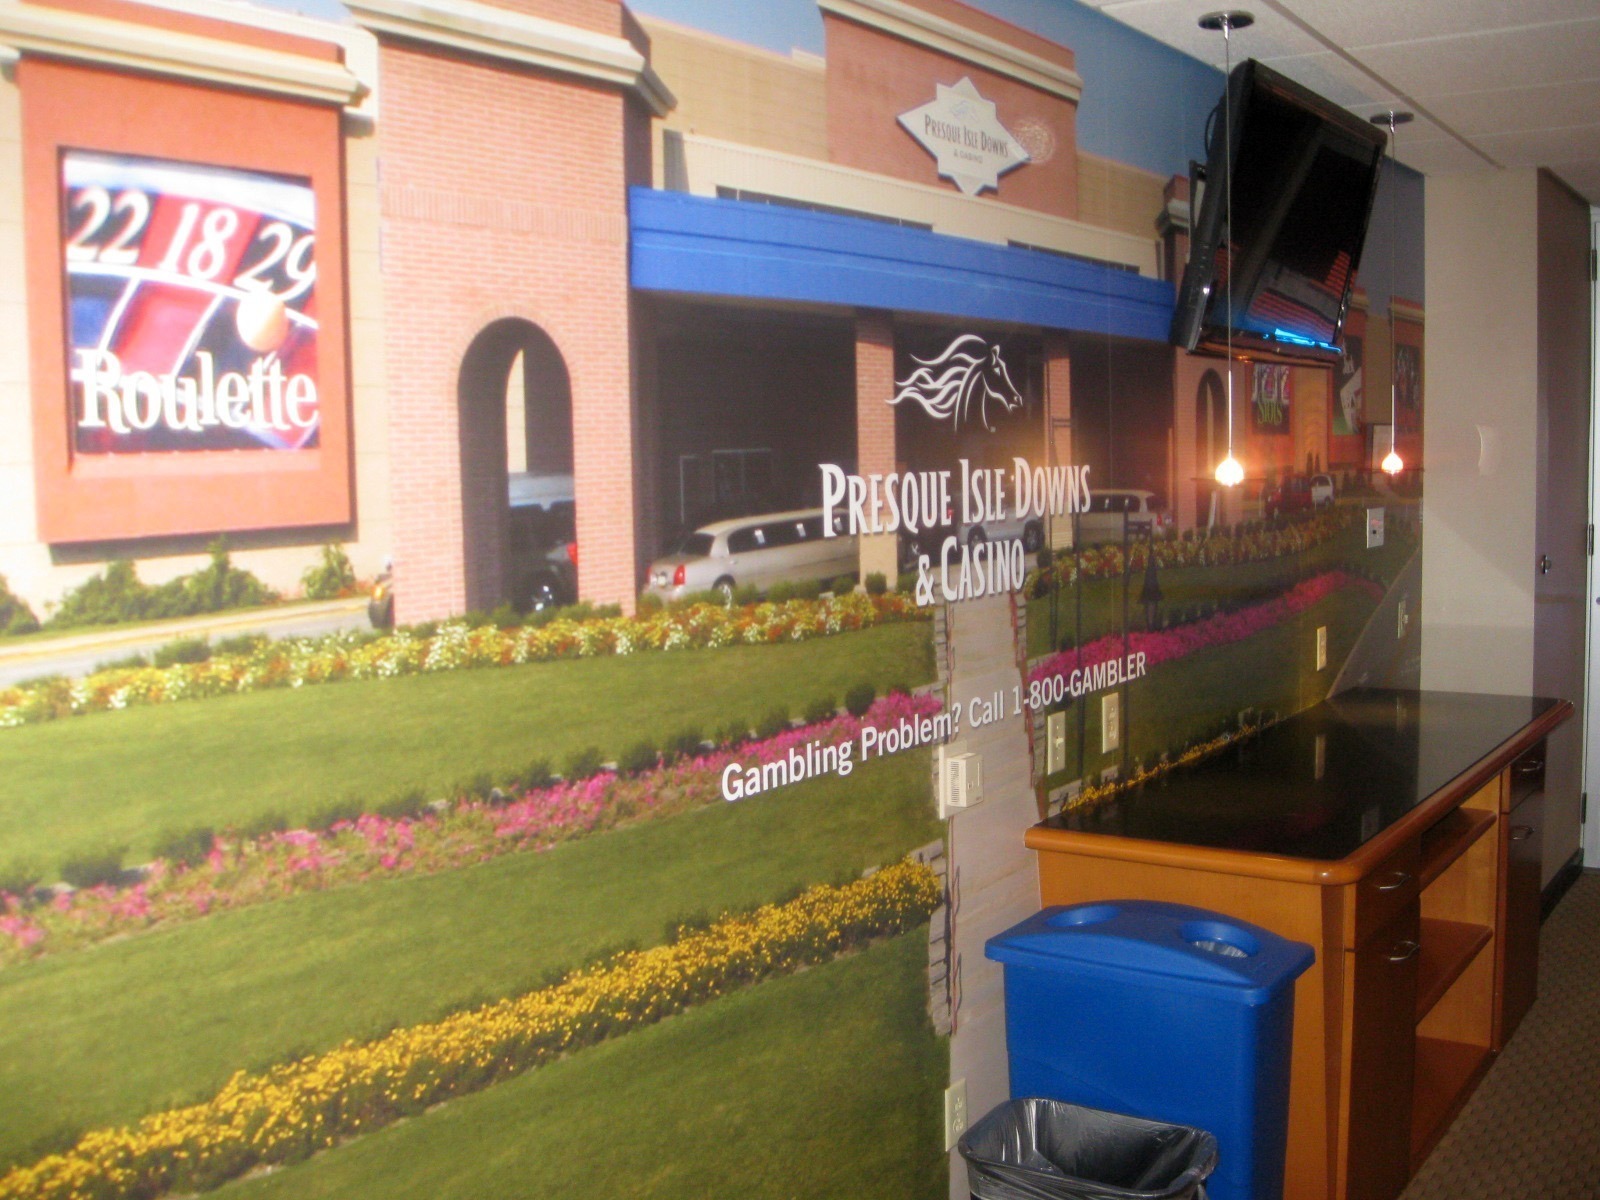 Full color wall graphics printed in our wide format department and installed by our CS team at Presque Isle.